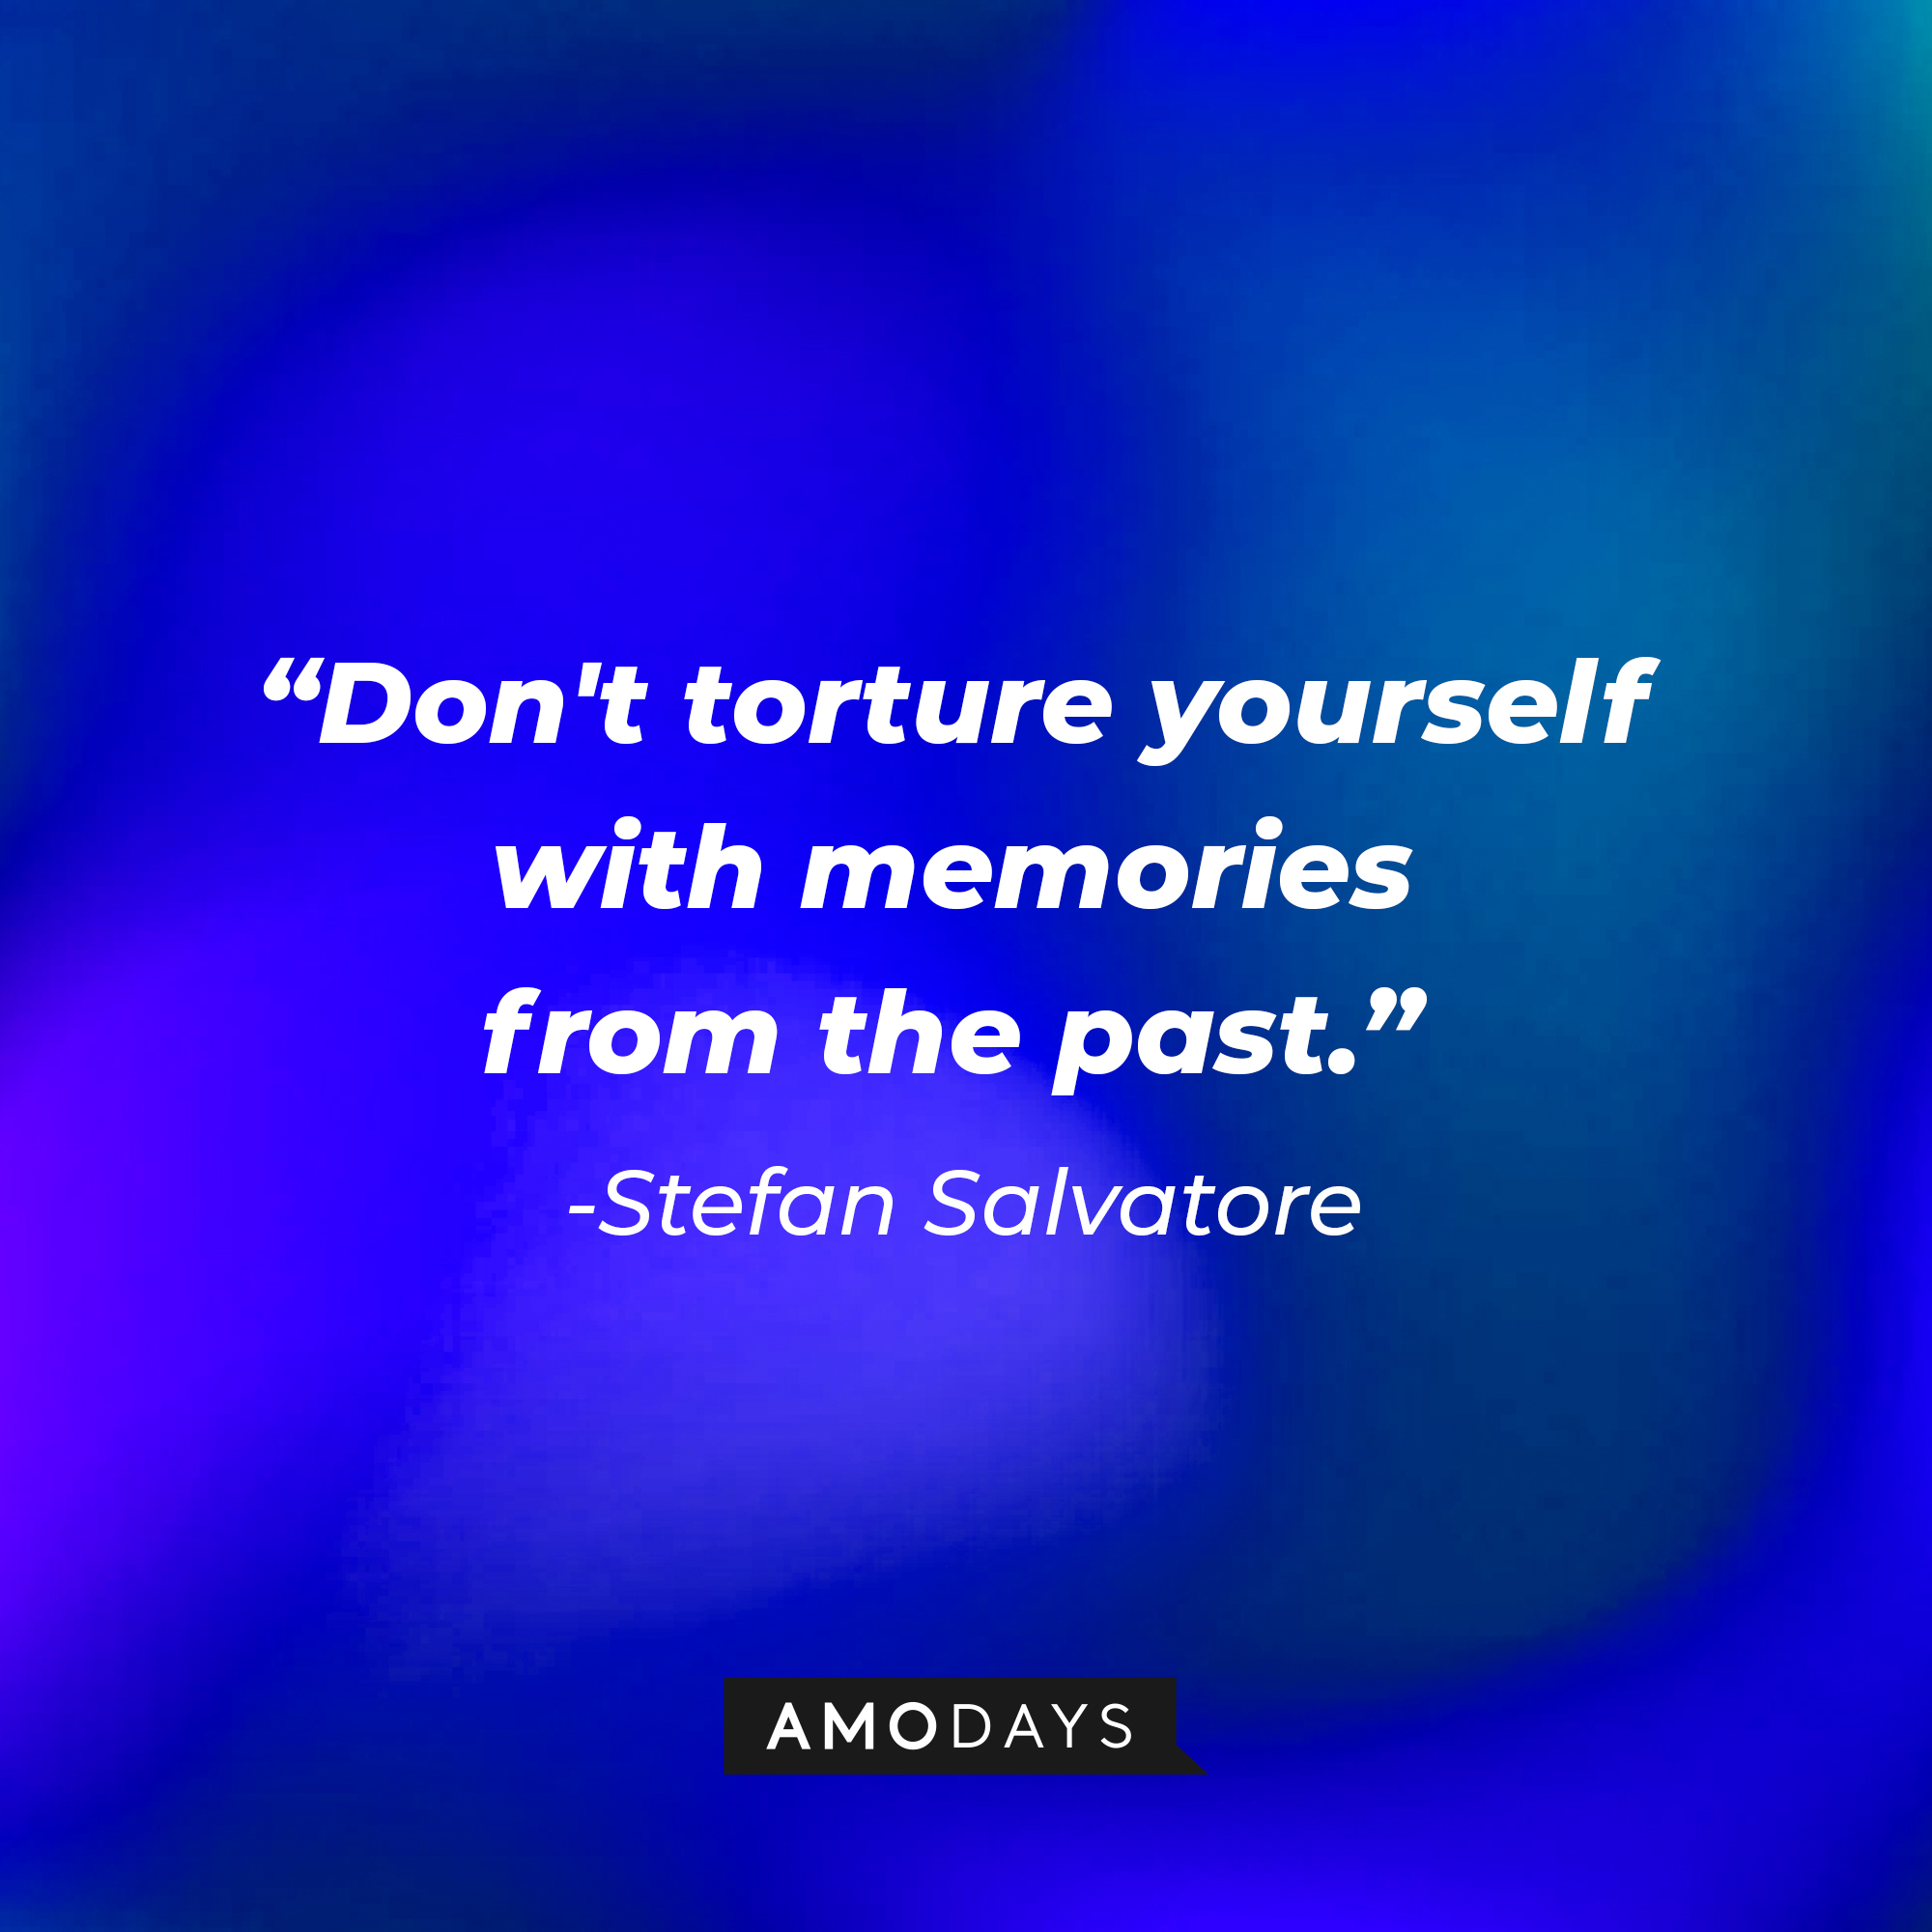 Stefan Salvatore's quote: "Don't torture yourself with memories from the past." | Source: AmoDays